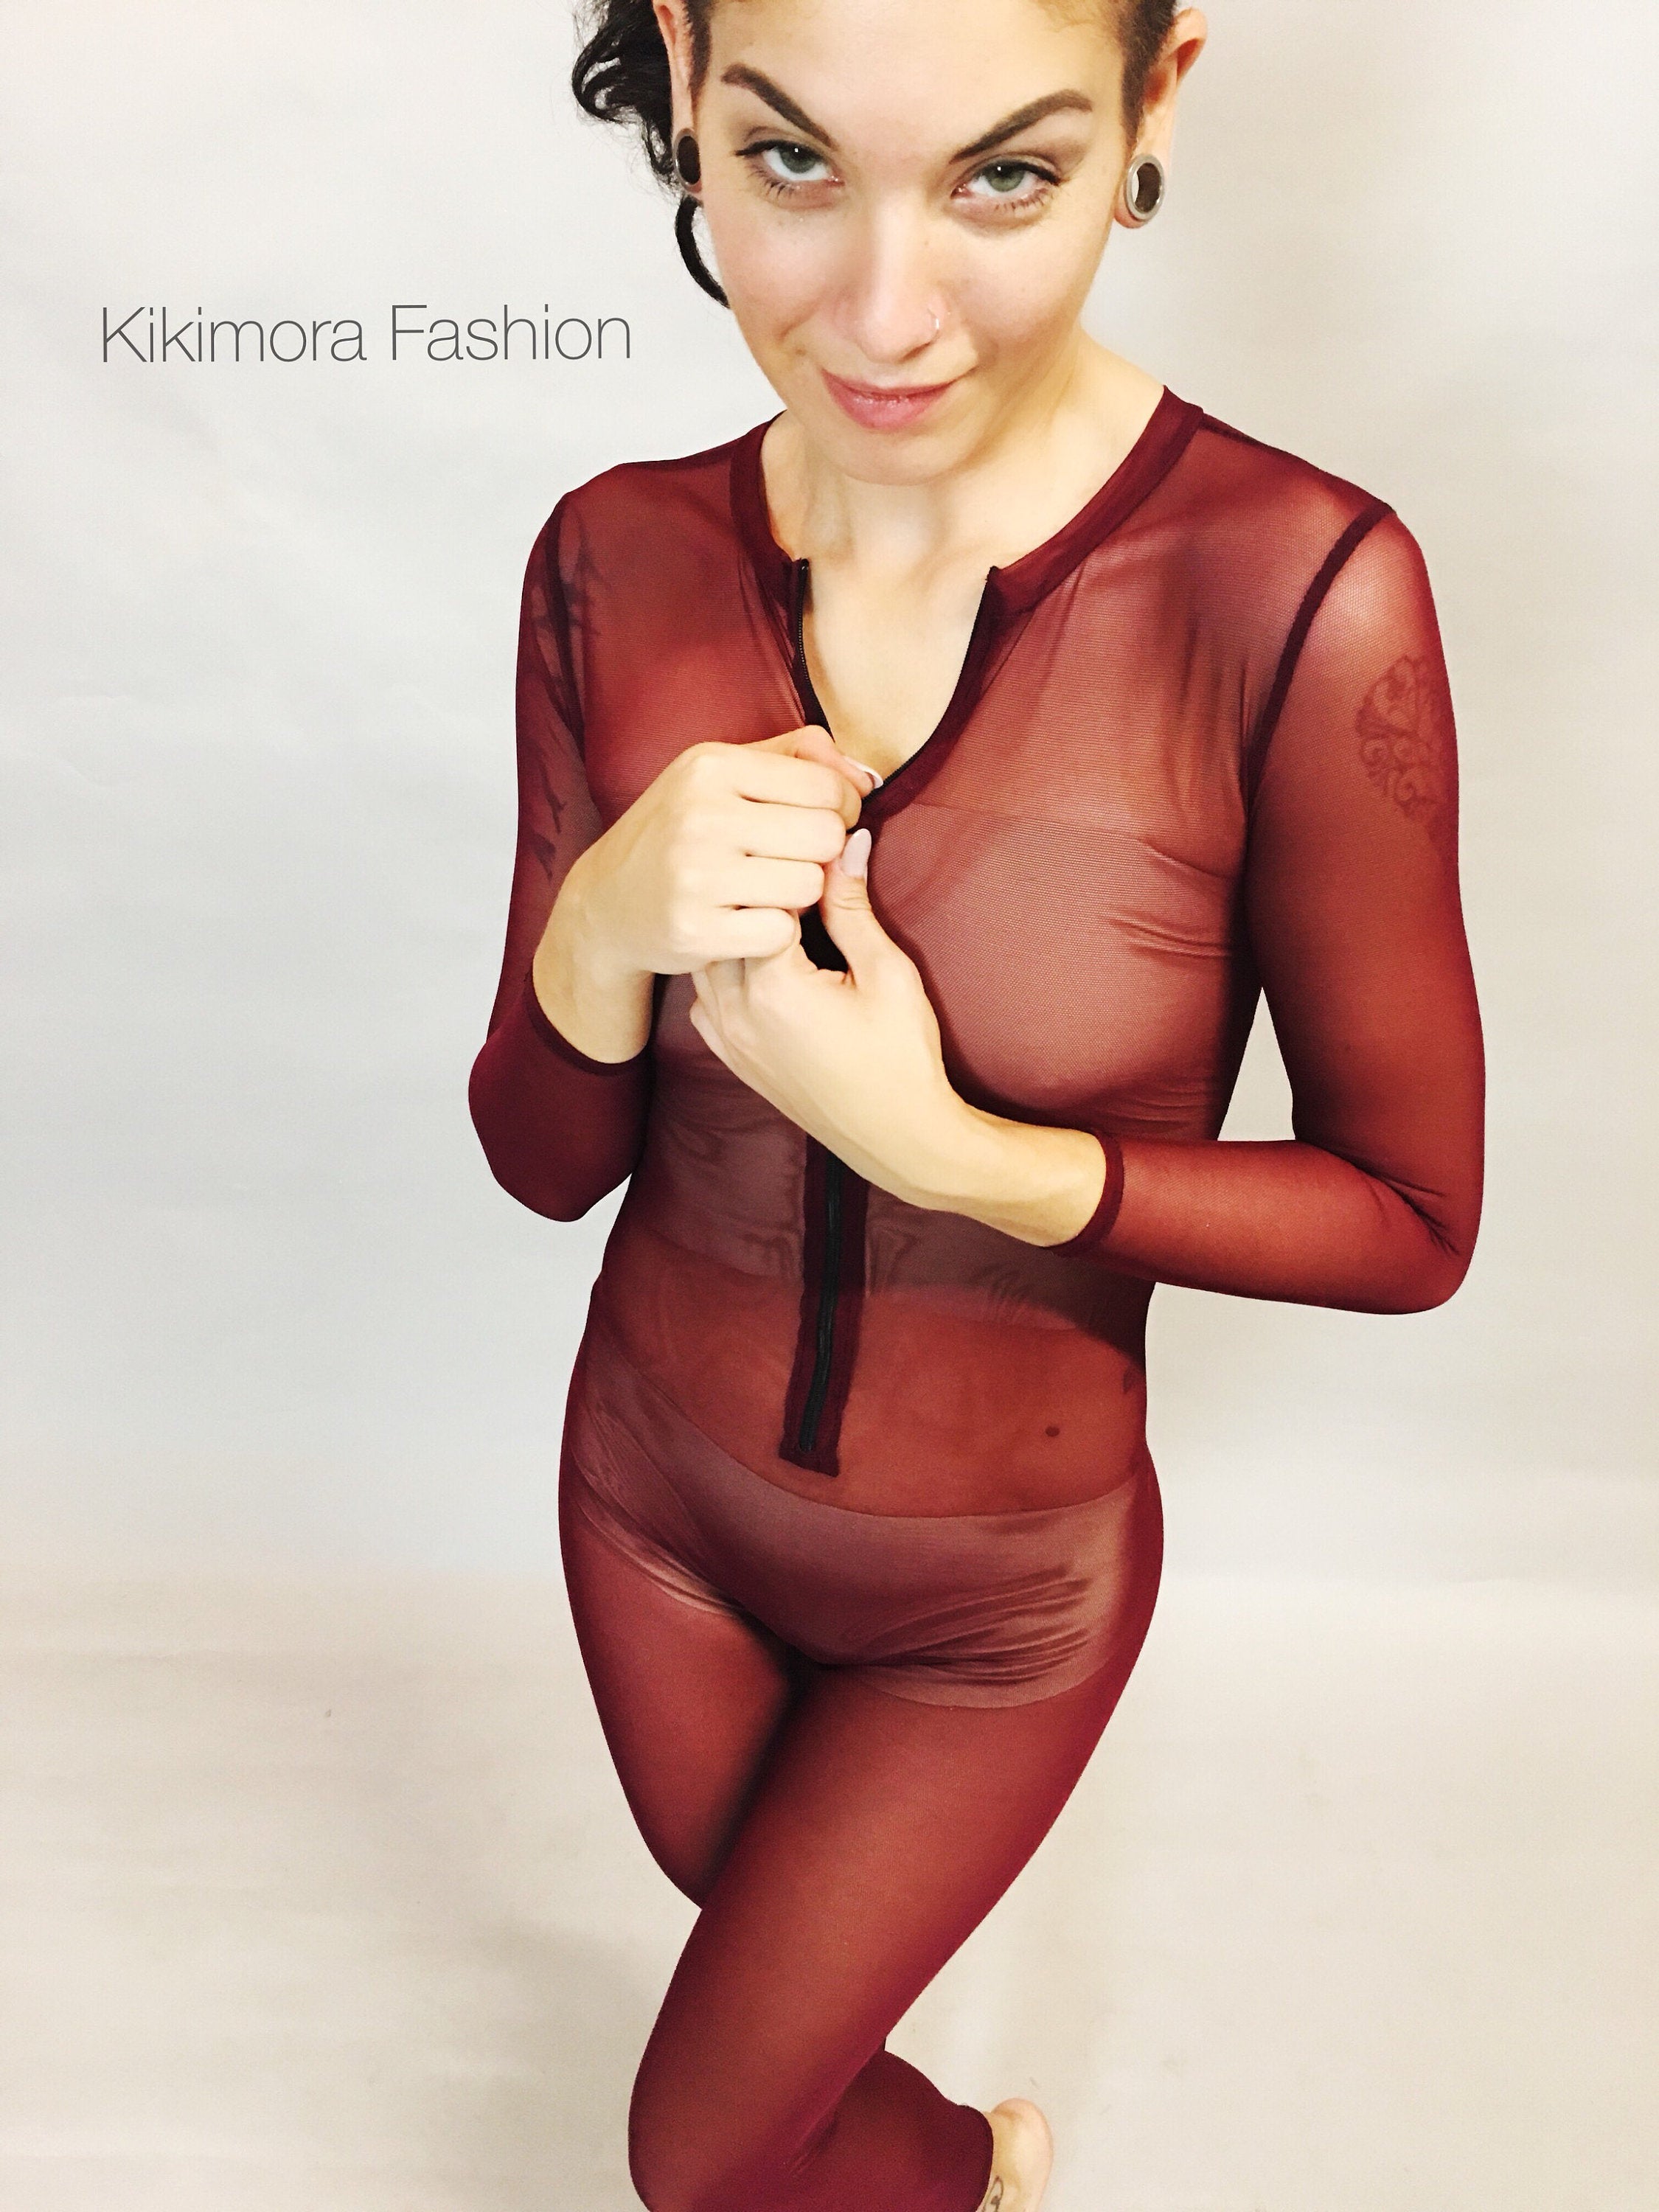 Dark Cherry Mesh Catsuit, Bodysuit, Costume for Dancers, Circus Performers, Festival Party